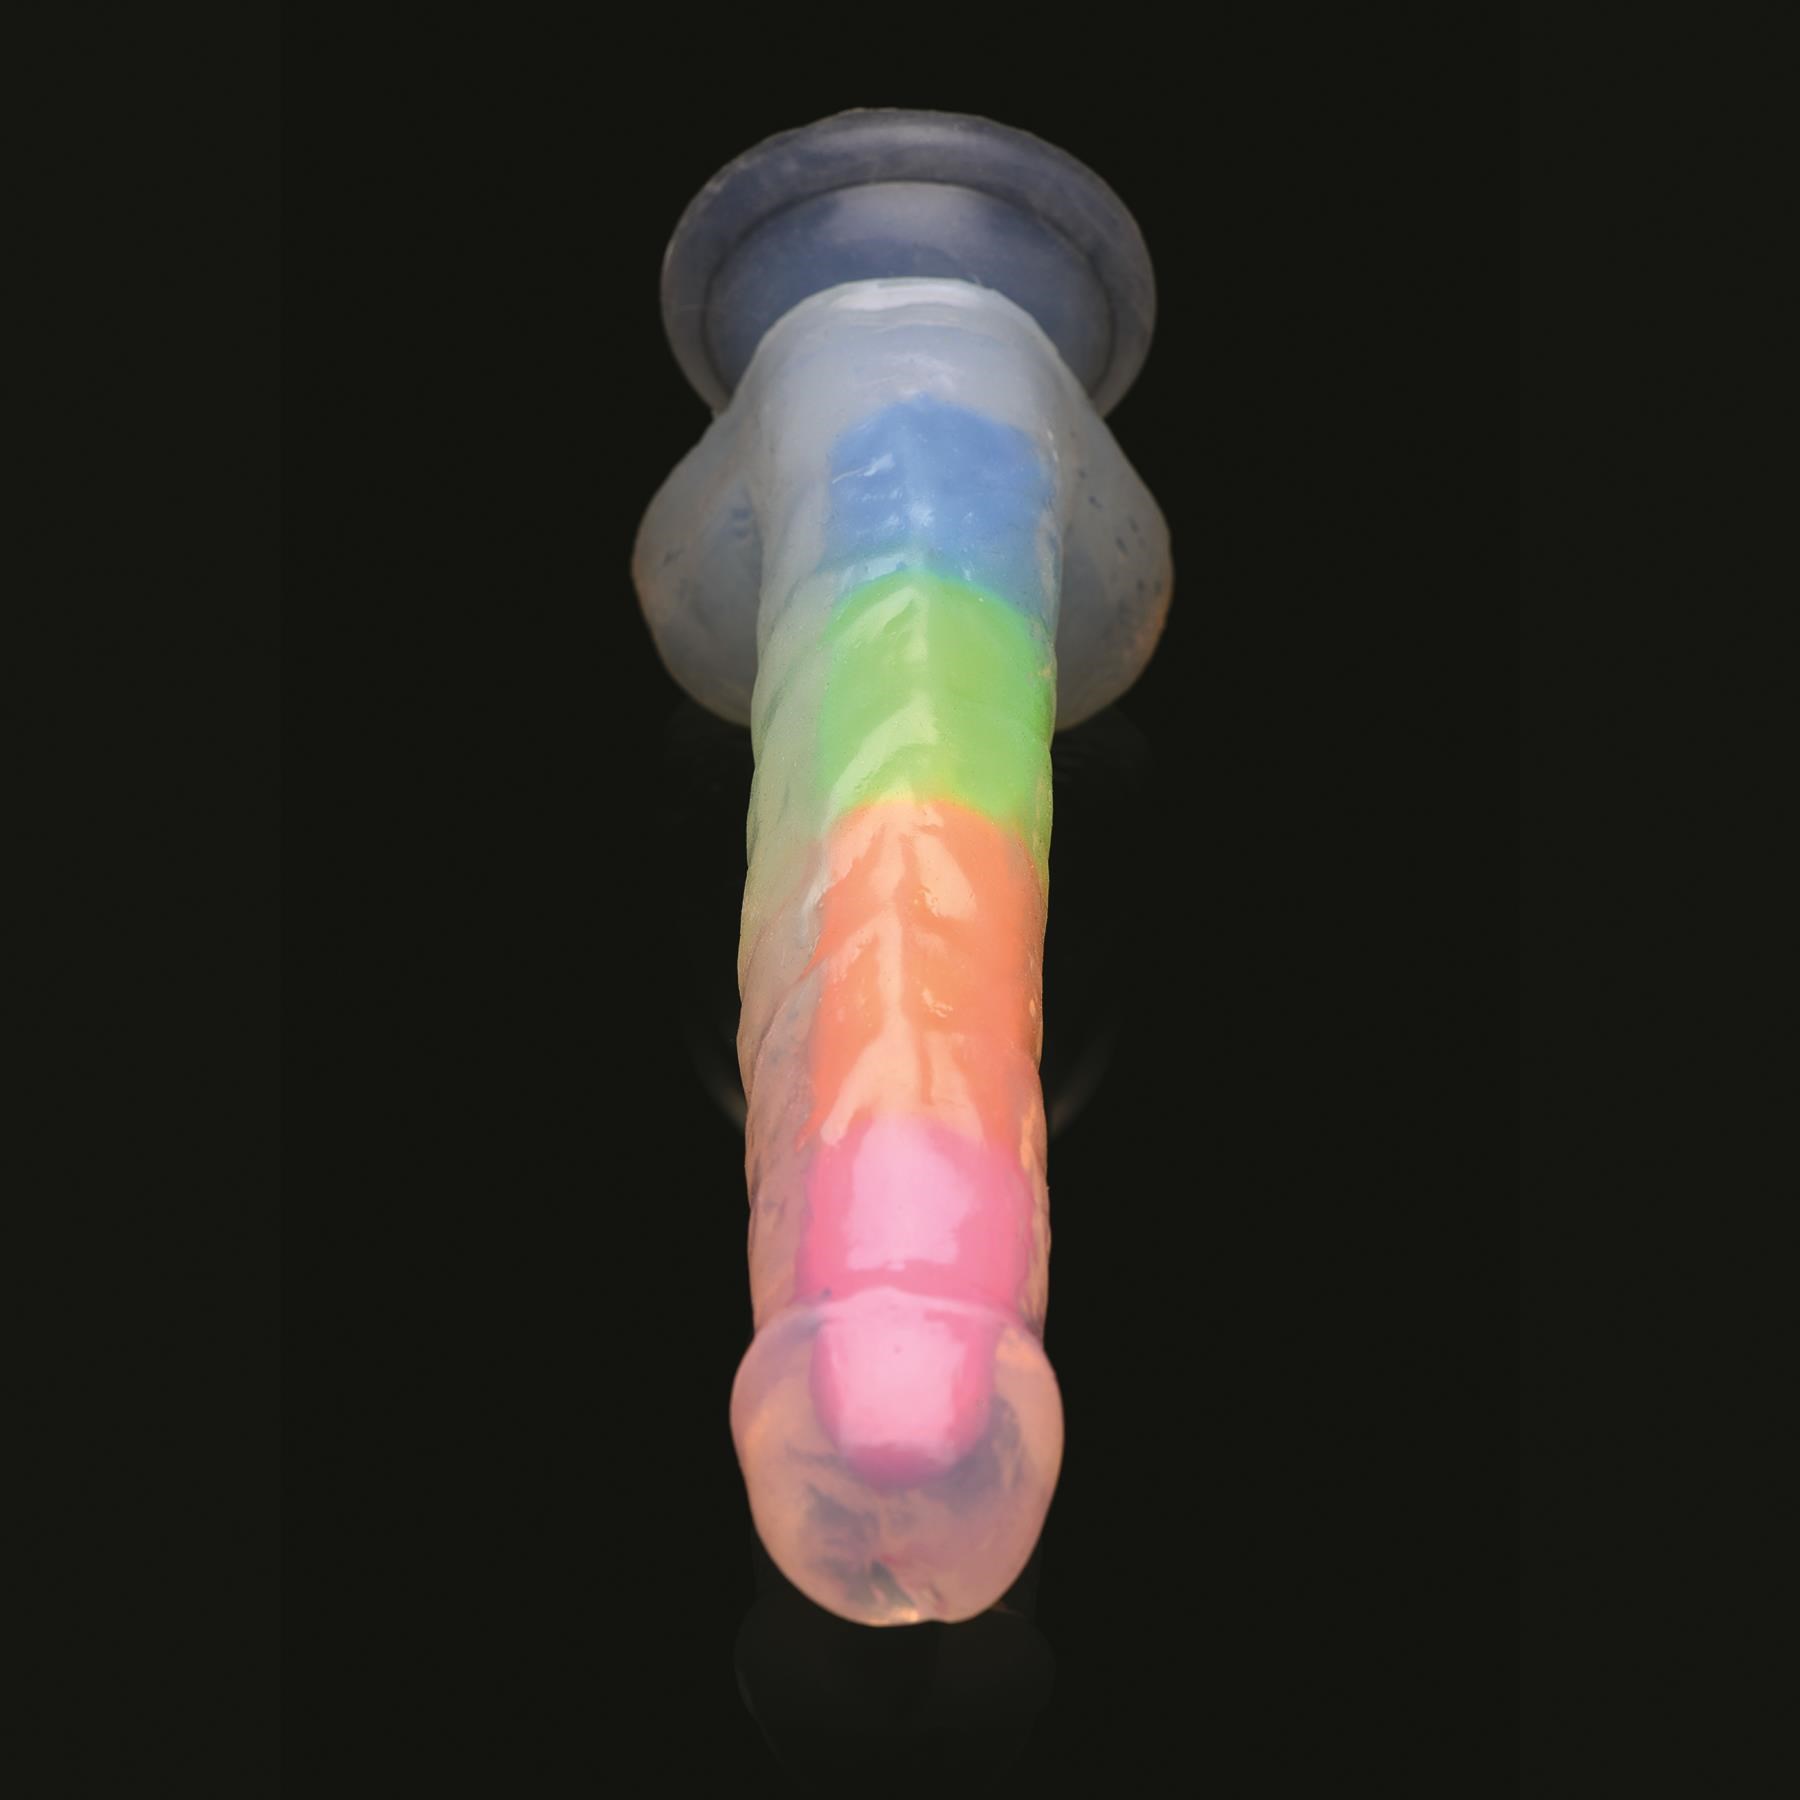 Lollicock 7 Inch Glow in the Dark Rainbow Dildo With Balls - Product Shot #5